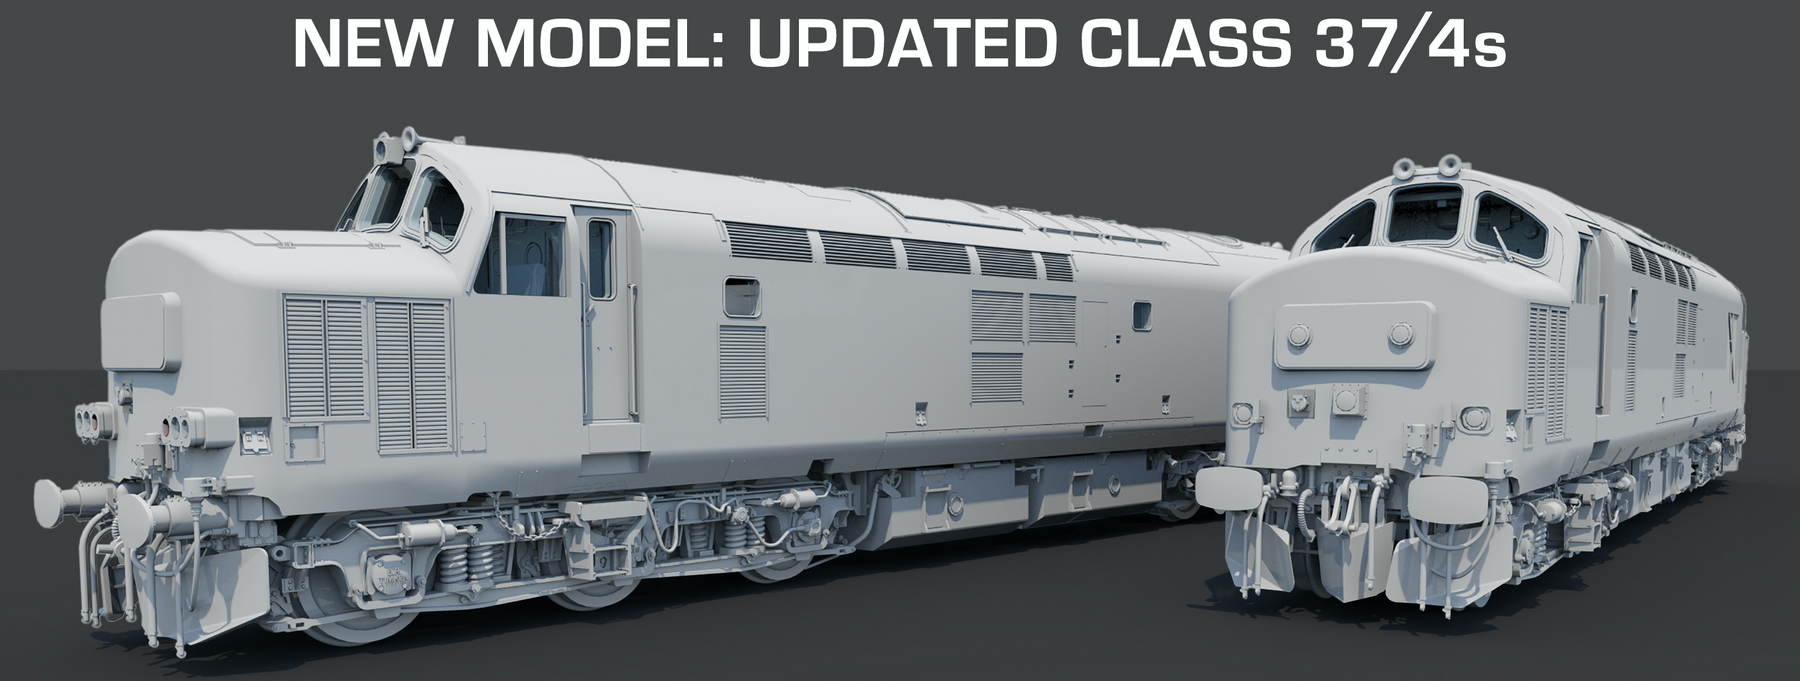 New Announcement: Modern Class 37/4 - Another Missing Link!